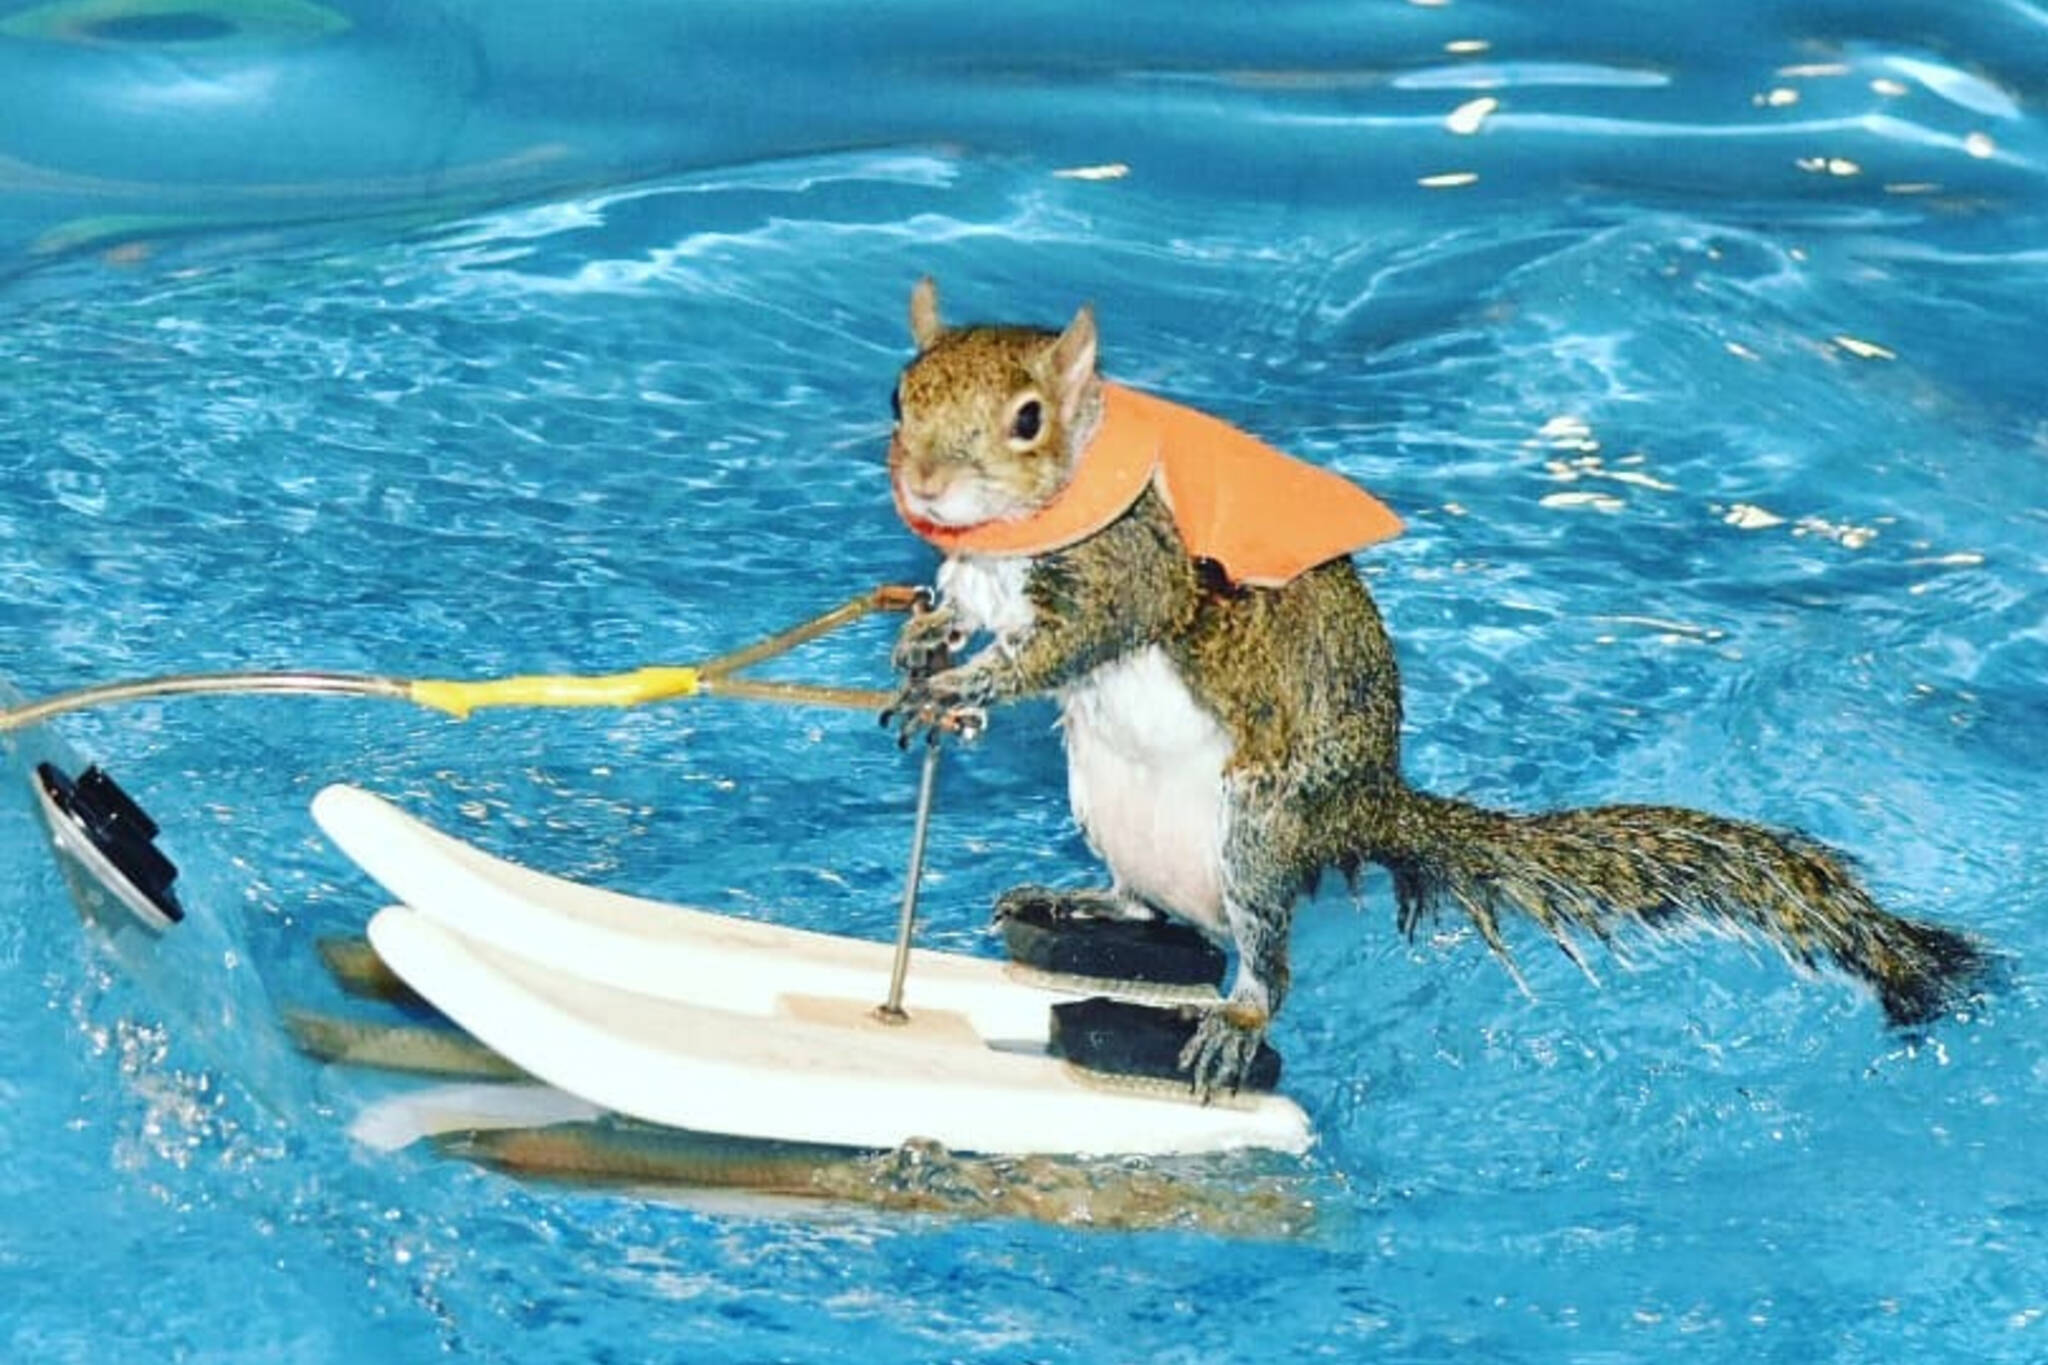 20180115 Water Skiing Squirrel Toronto ?w=2048&cmd=resize Then Crop&height=1365&quality=70